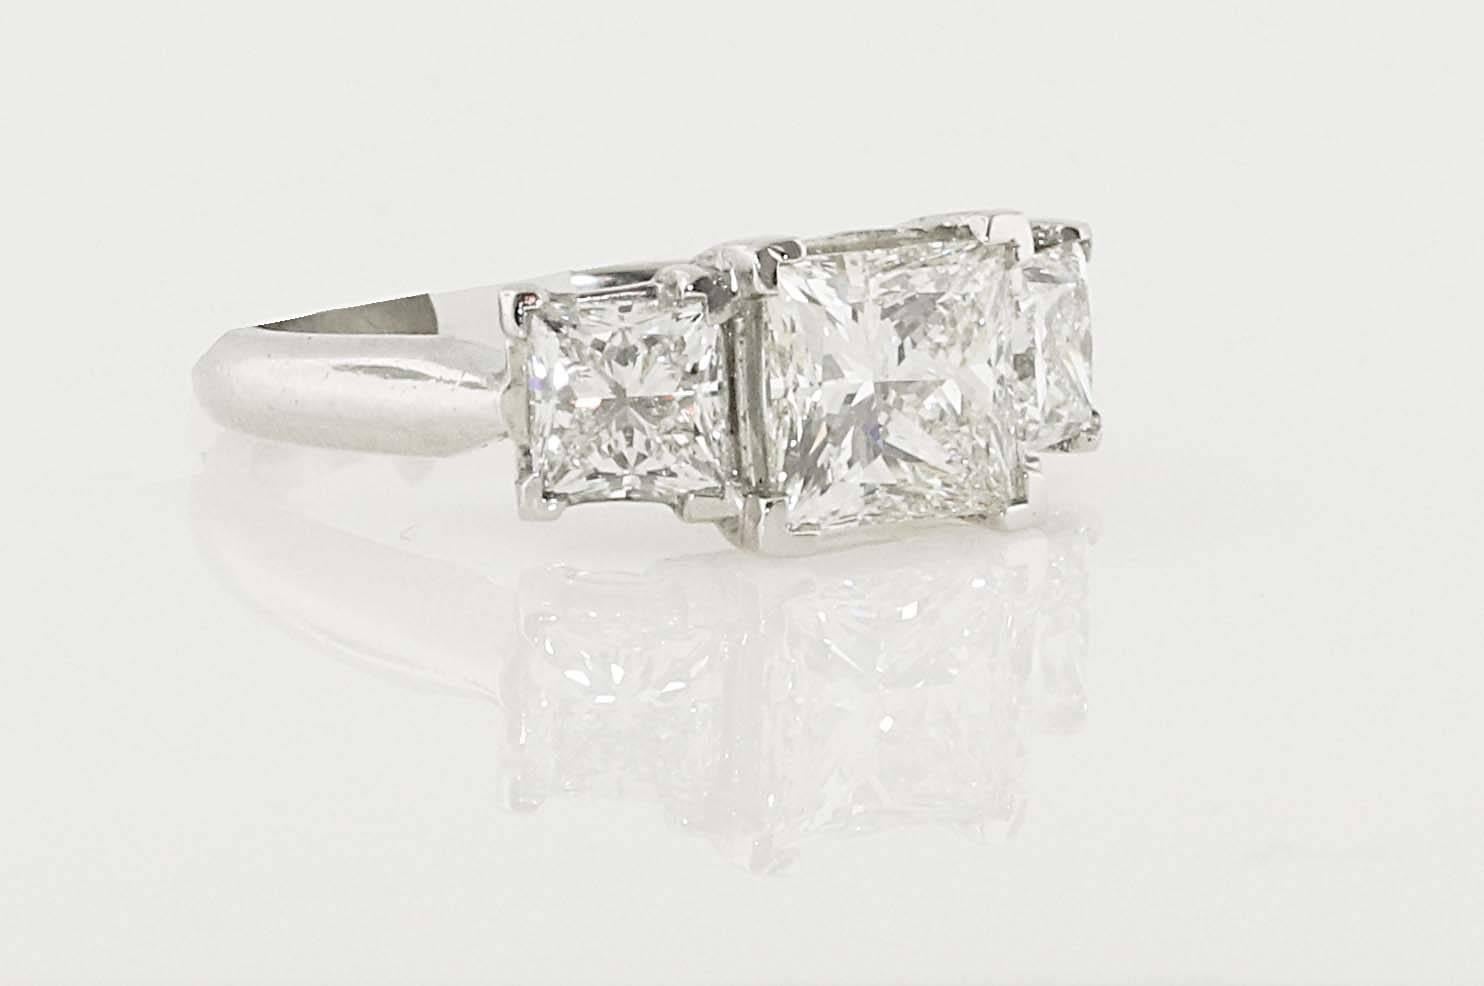 Spectacular 3 stone certified Princess Cut diamond ring set in platinum. The center princess cut diamond is 2.01 i-vs2 EGL USA certified and the sides are .77 G-Si1 EGL USA certified and .78 F-VS2 EGL USA certified. 

Ring is a size 6 but can be